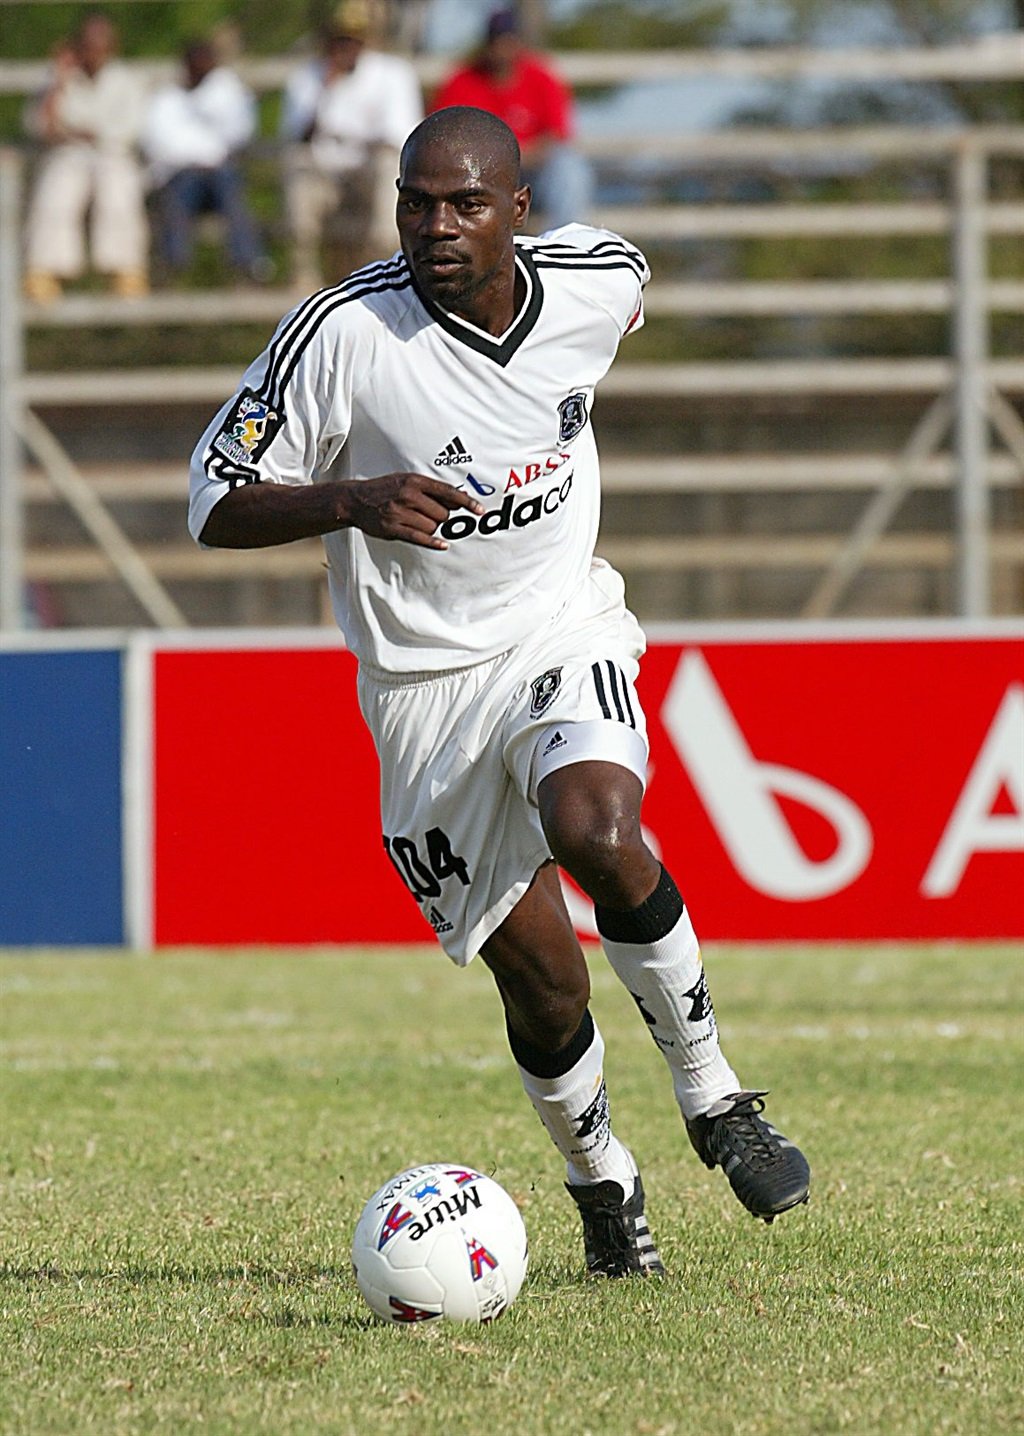 5 April 2003, ABSA Cup Soccer, Orlando Pirates v Silver Stars, Thohoyandou, Venda, Northern Province, South Africa. Abednego Netshiozwi in action. Photo Credit : - Duif du Toit/Gallo Images